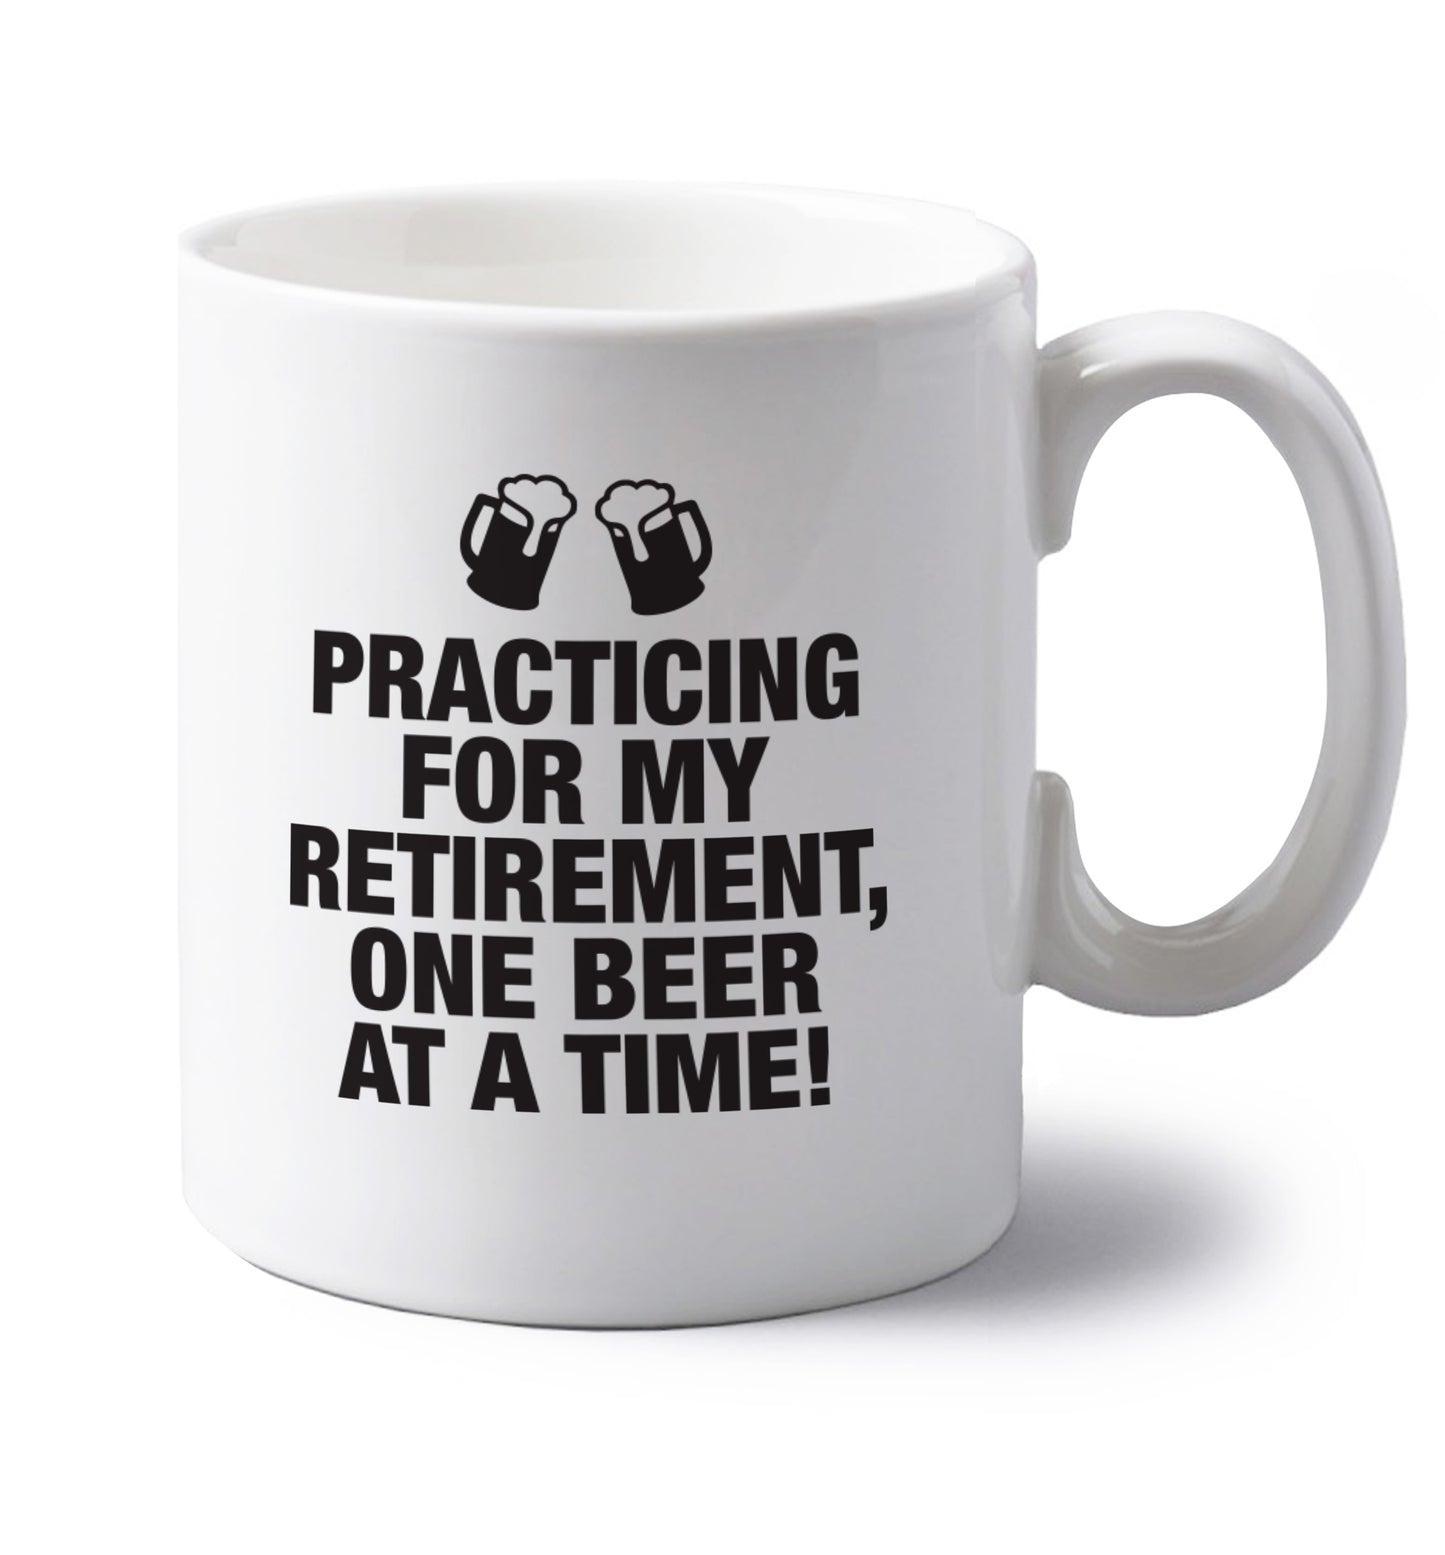 Practicing my retirement one beer at a time left handed white ceramic mug 